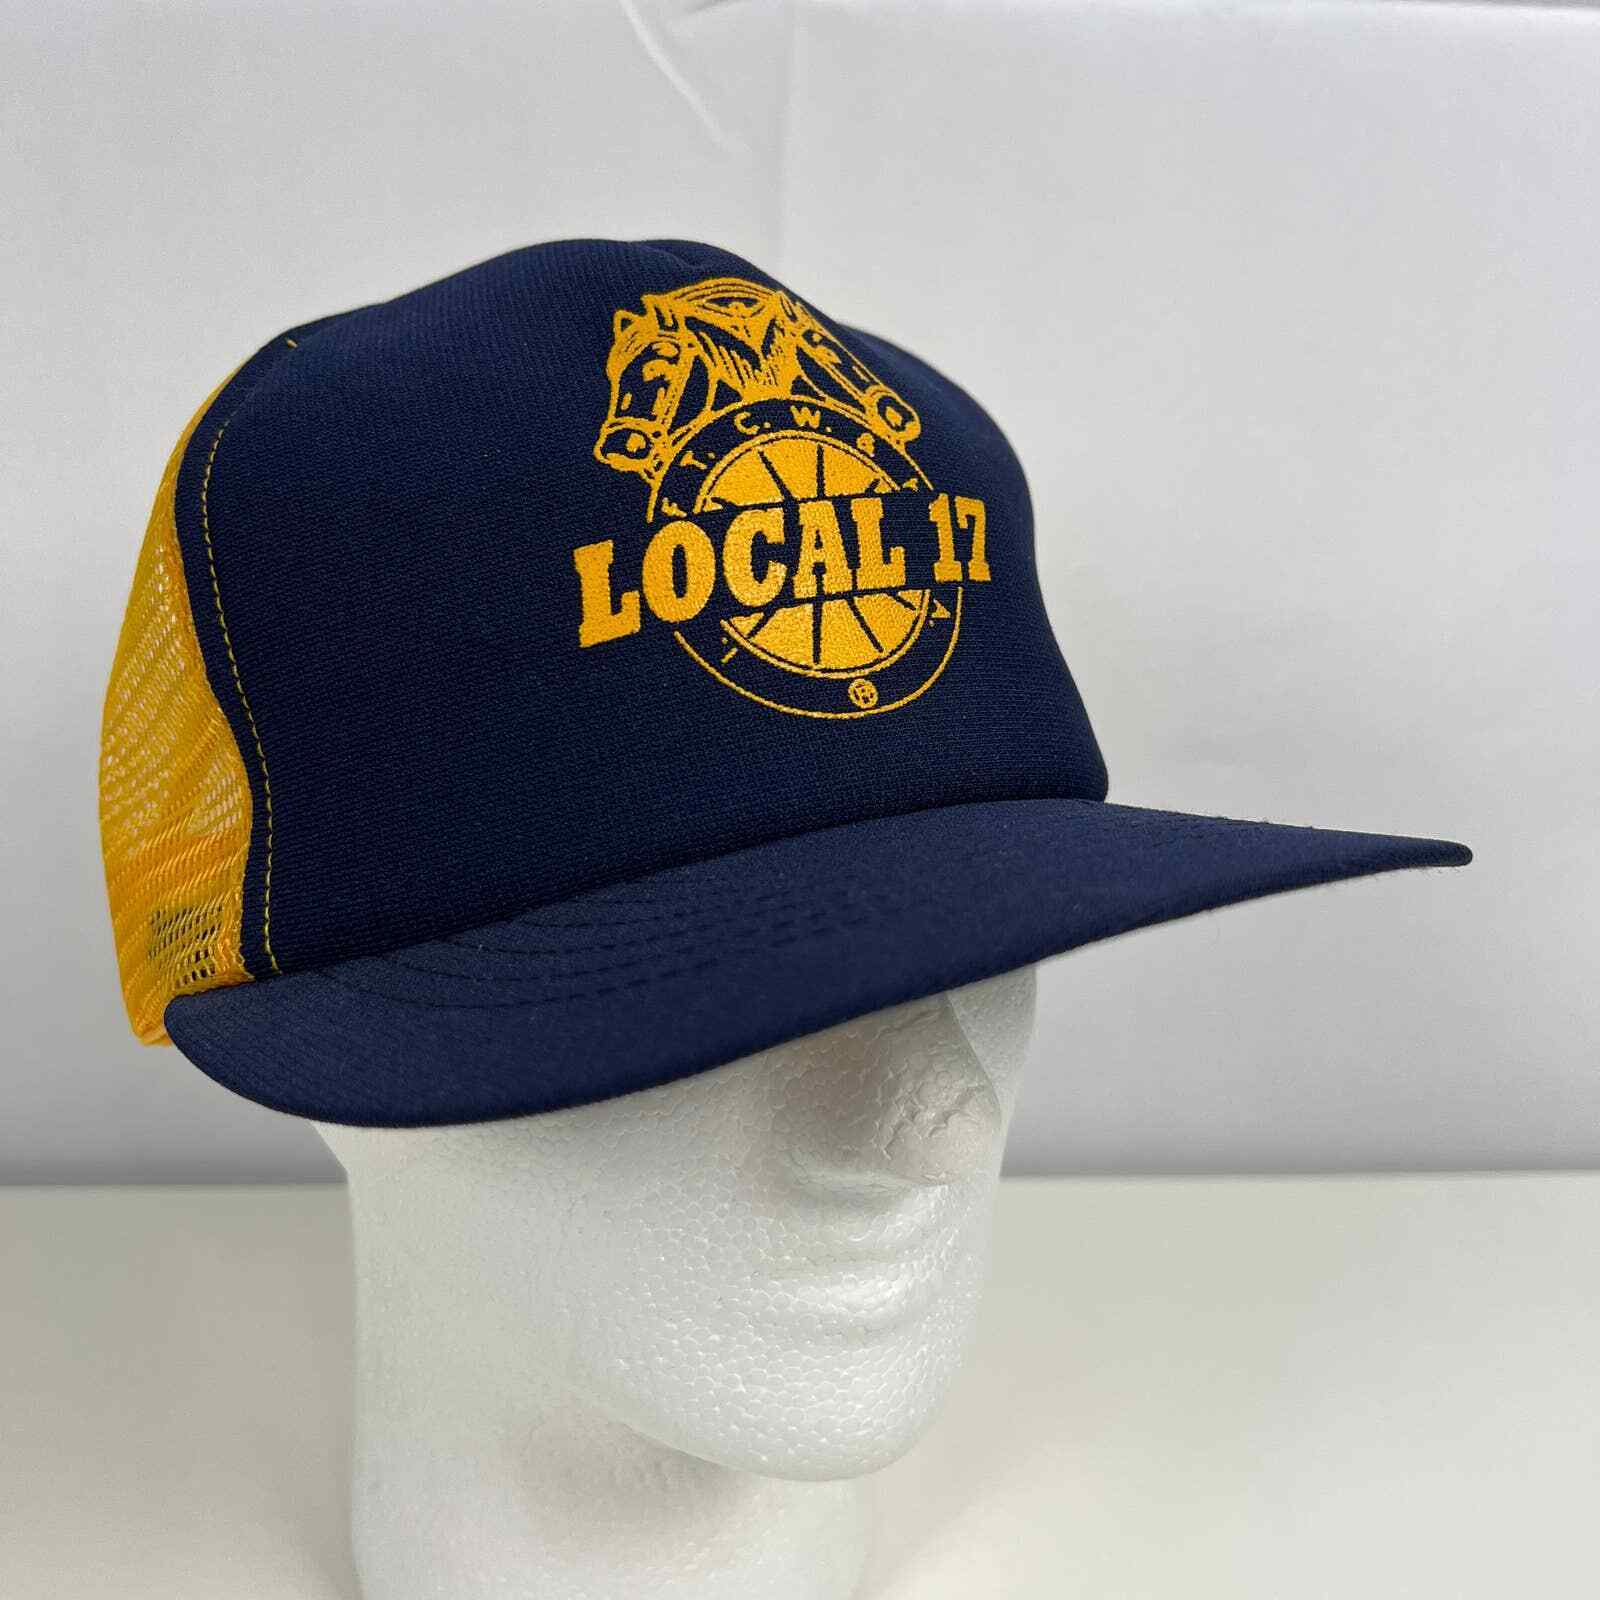 Vintage Teamsters Union Colorado Wyoming Local 17 Snap Back Trucker Baseball Hat